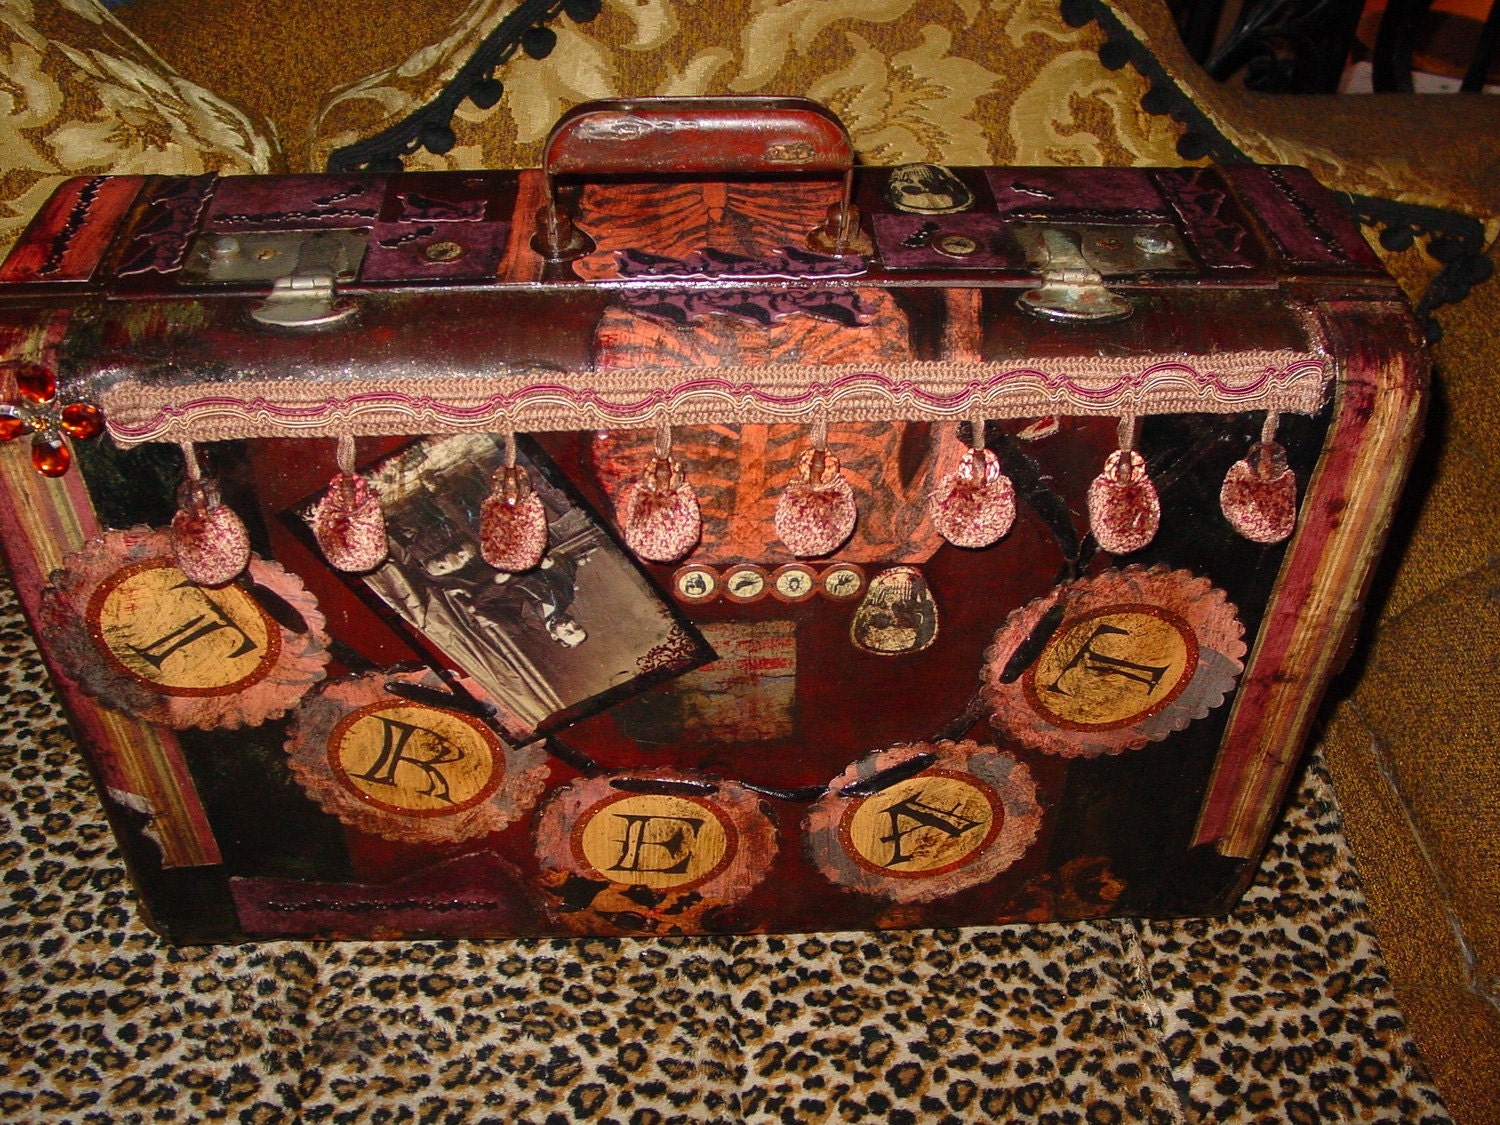 Trick or Tweet GOTHIC  recycled vintage suitcase from the 1940s  USE TO STORE your Halloween costume or as prop